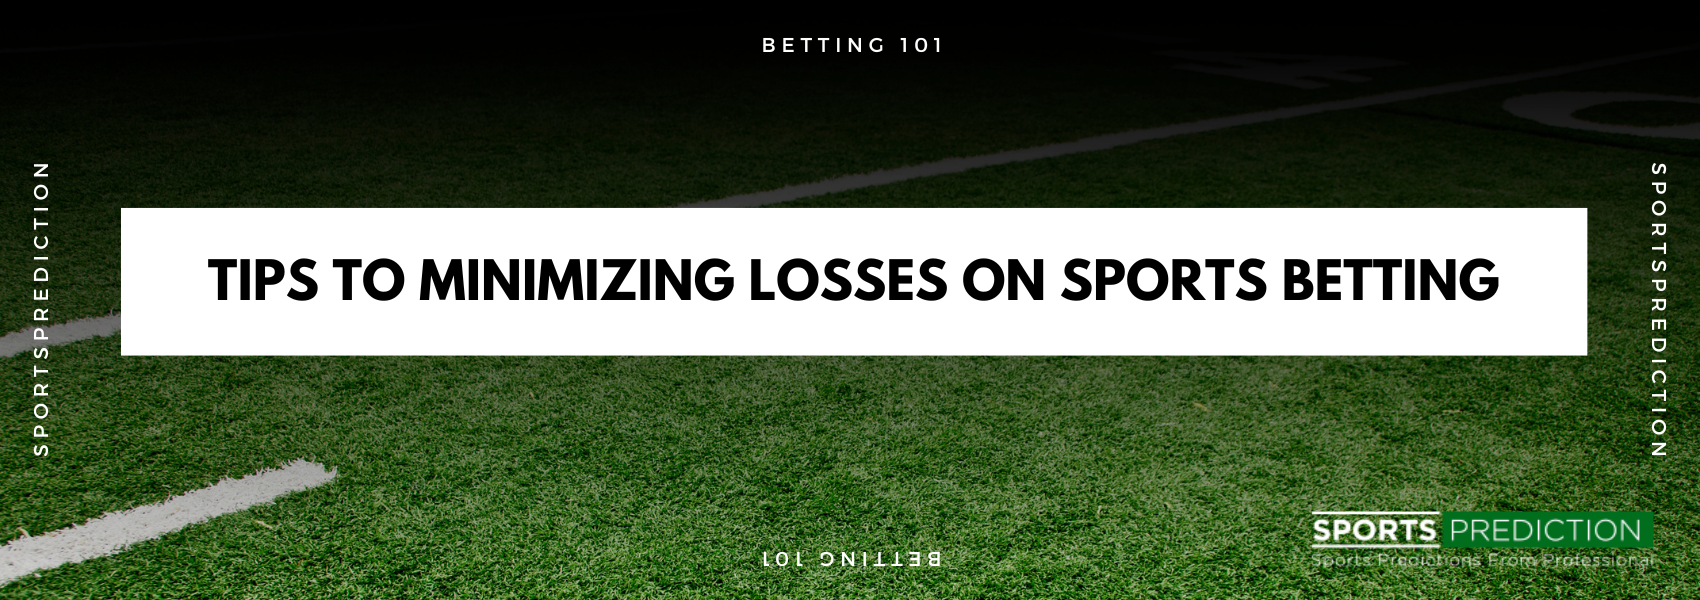 What Are Some Tips For Minimizing Losses On Sports Betting?